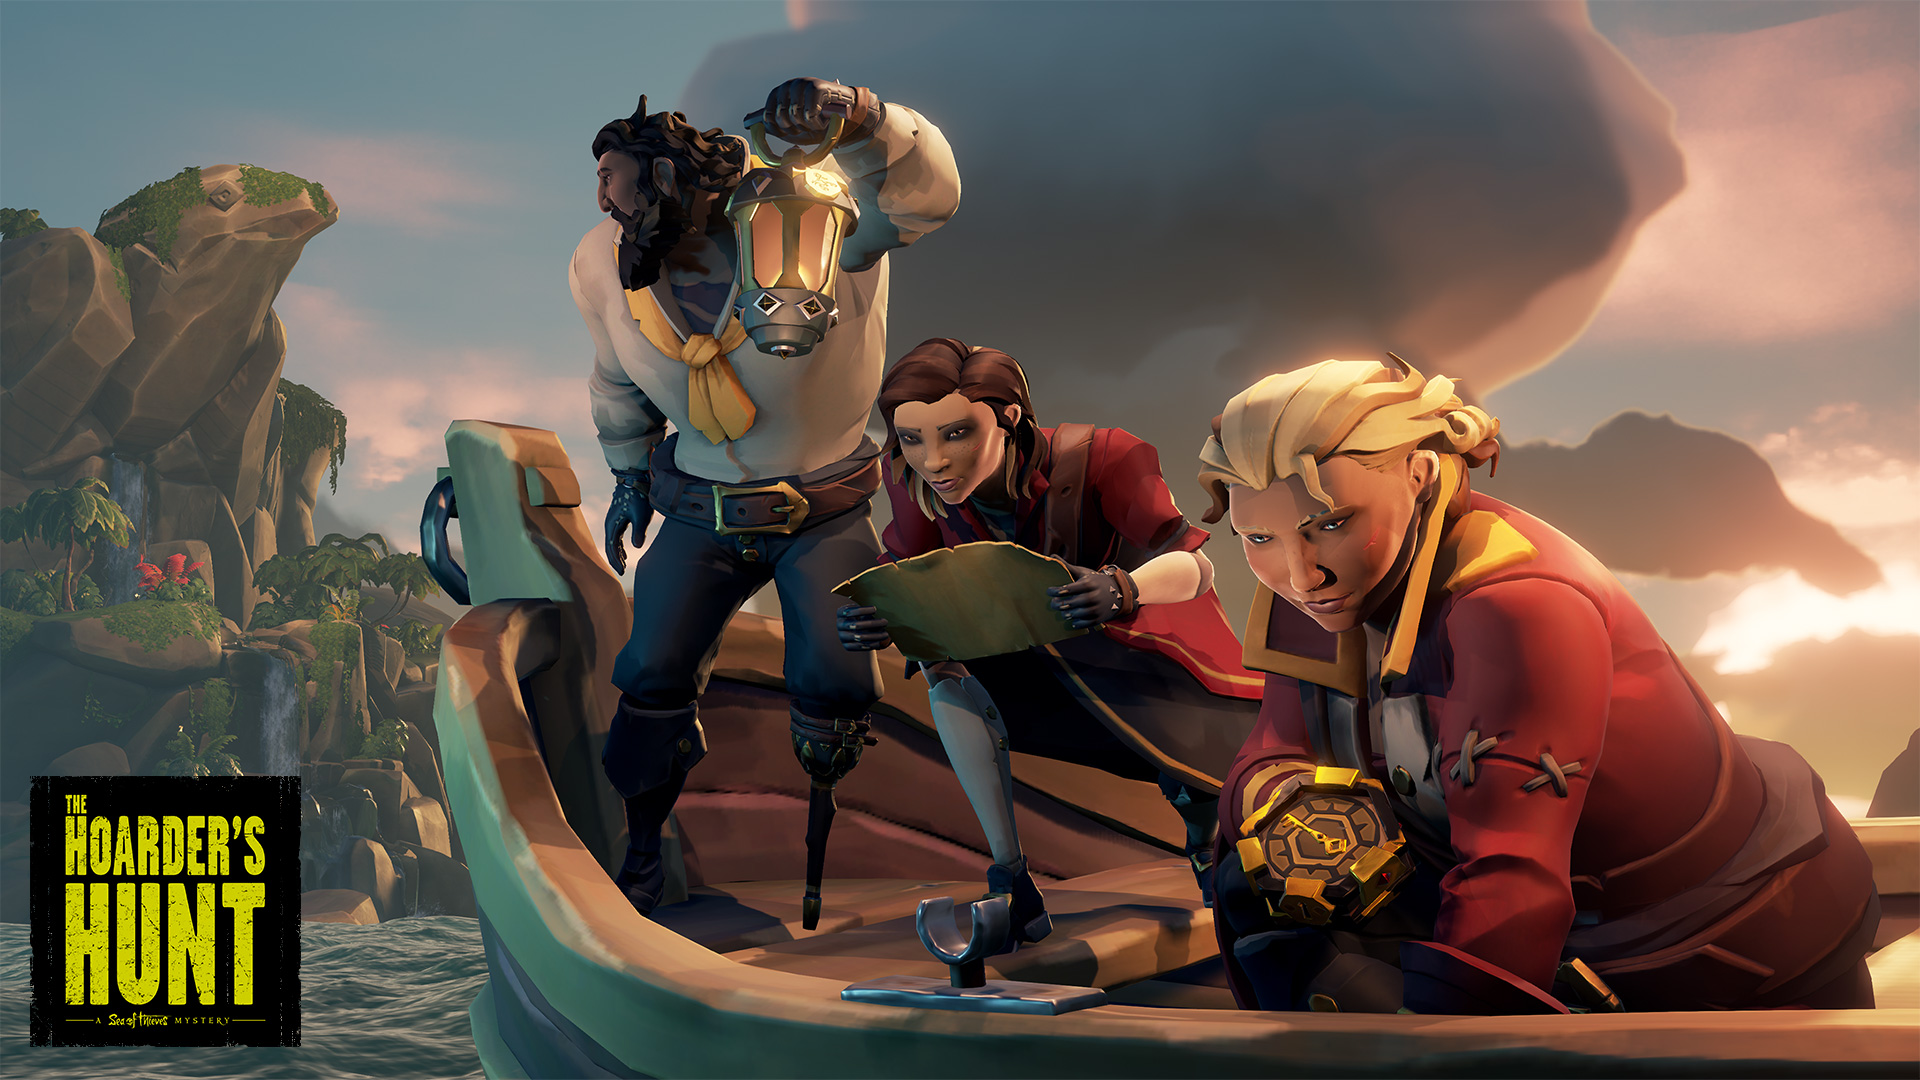 Sea of Thieves Hoarder's Hunt Image